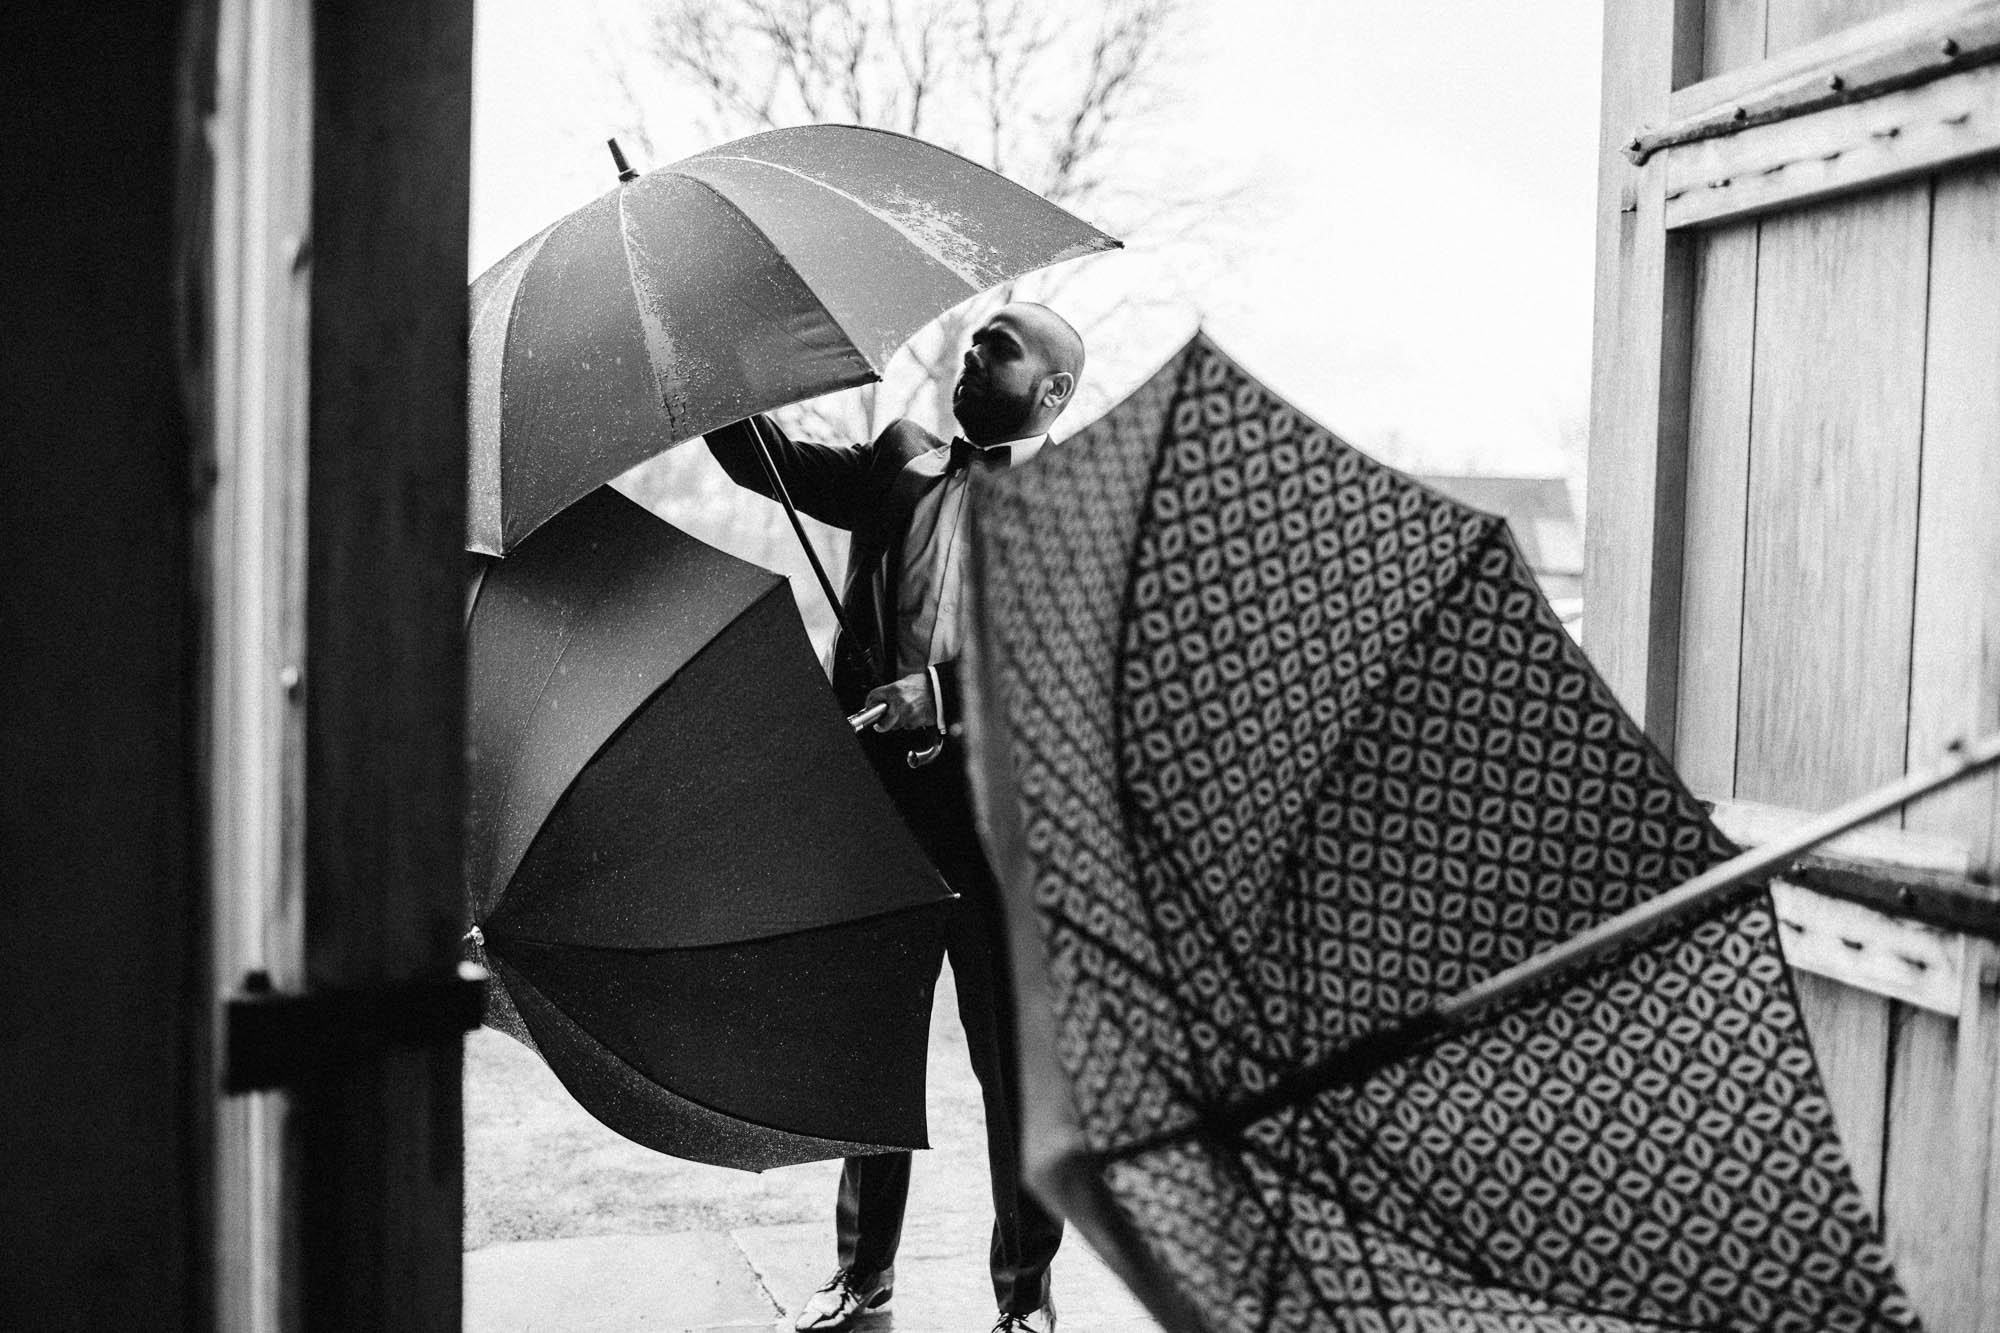 Black and white shot of wedding guests putting up umbrellas